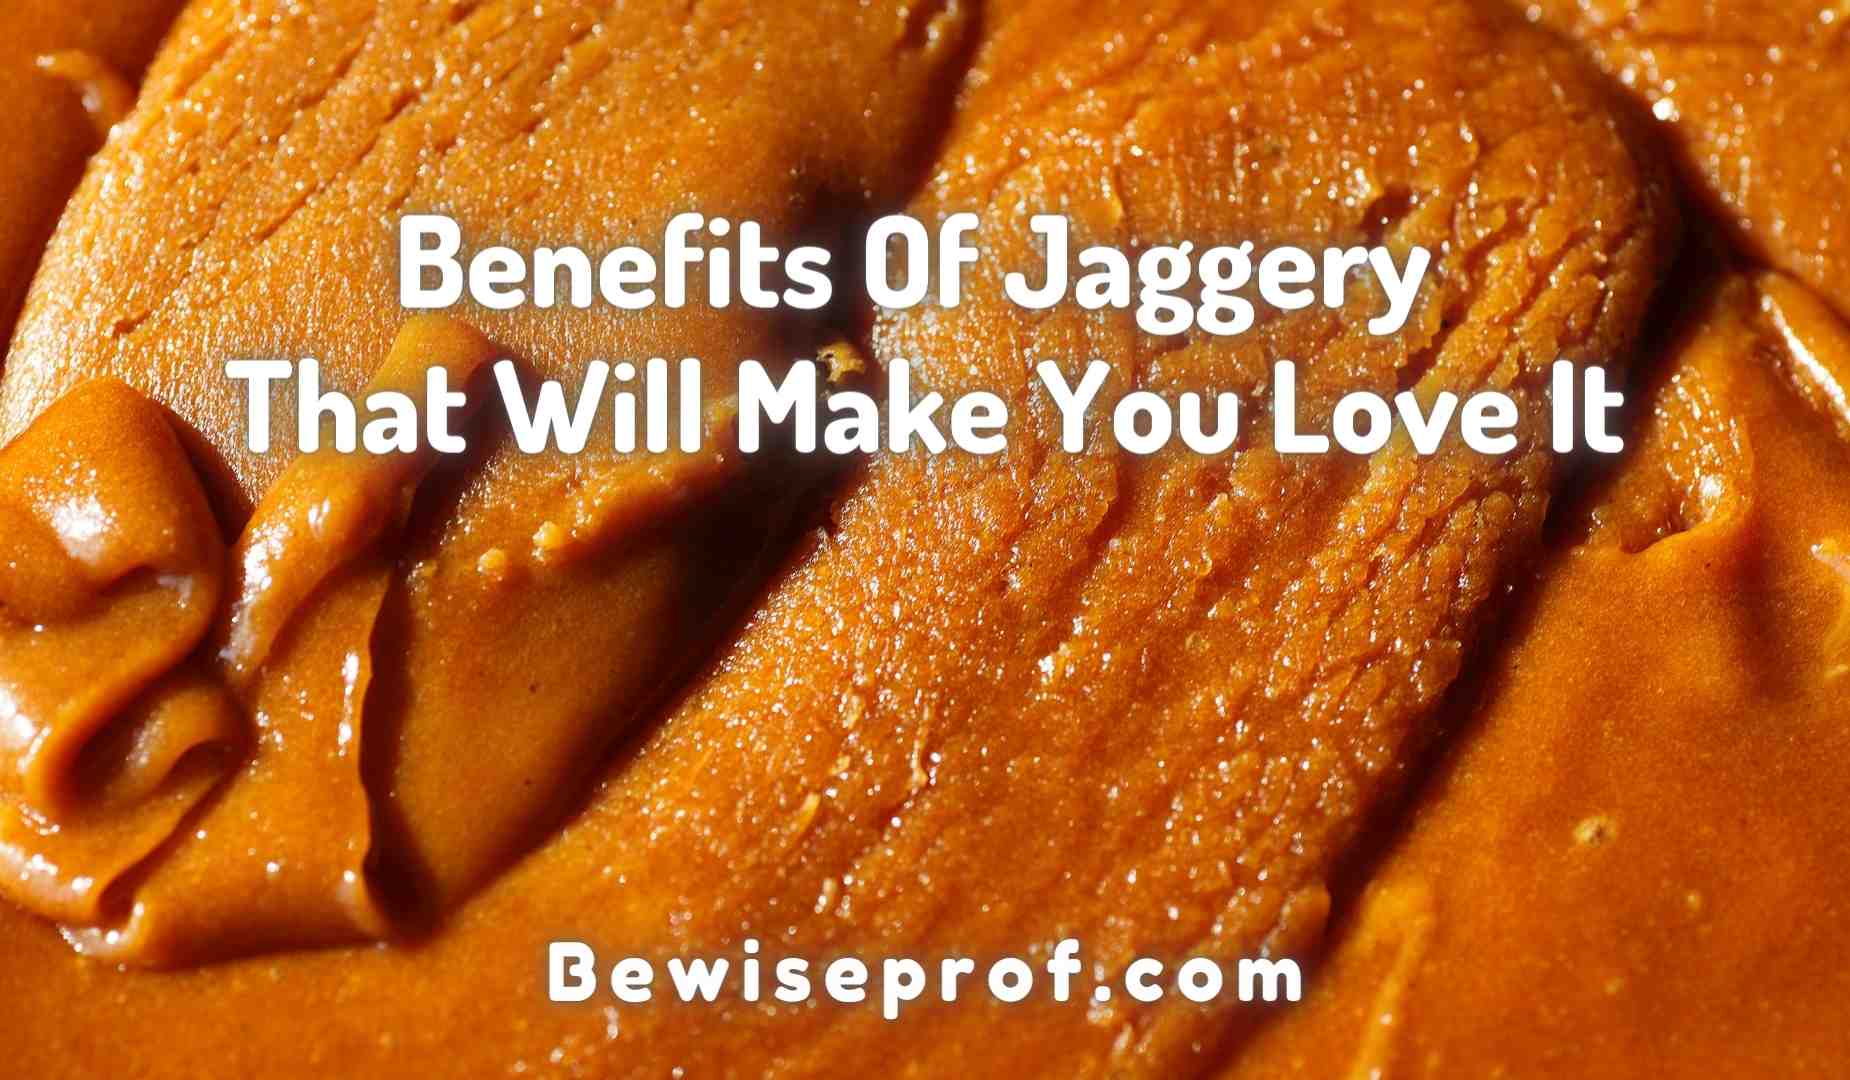 Benefits Of Jaggery That Will Make You Love It